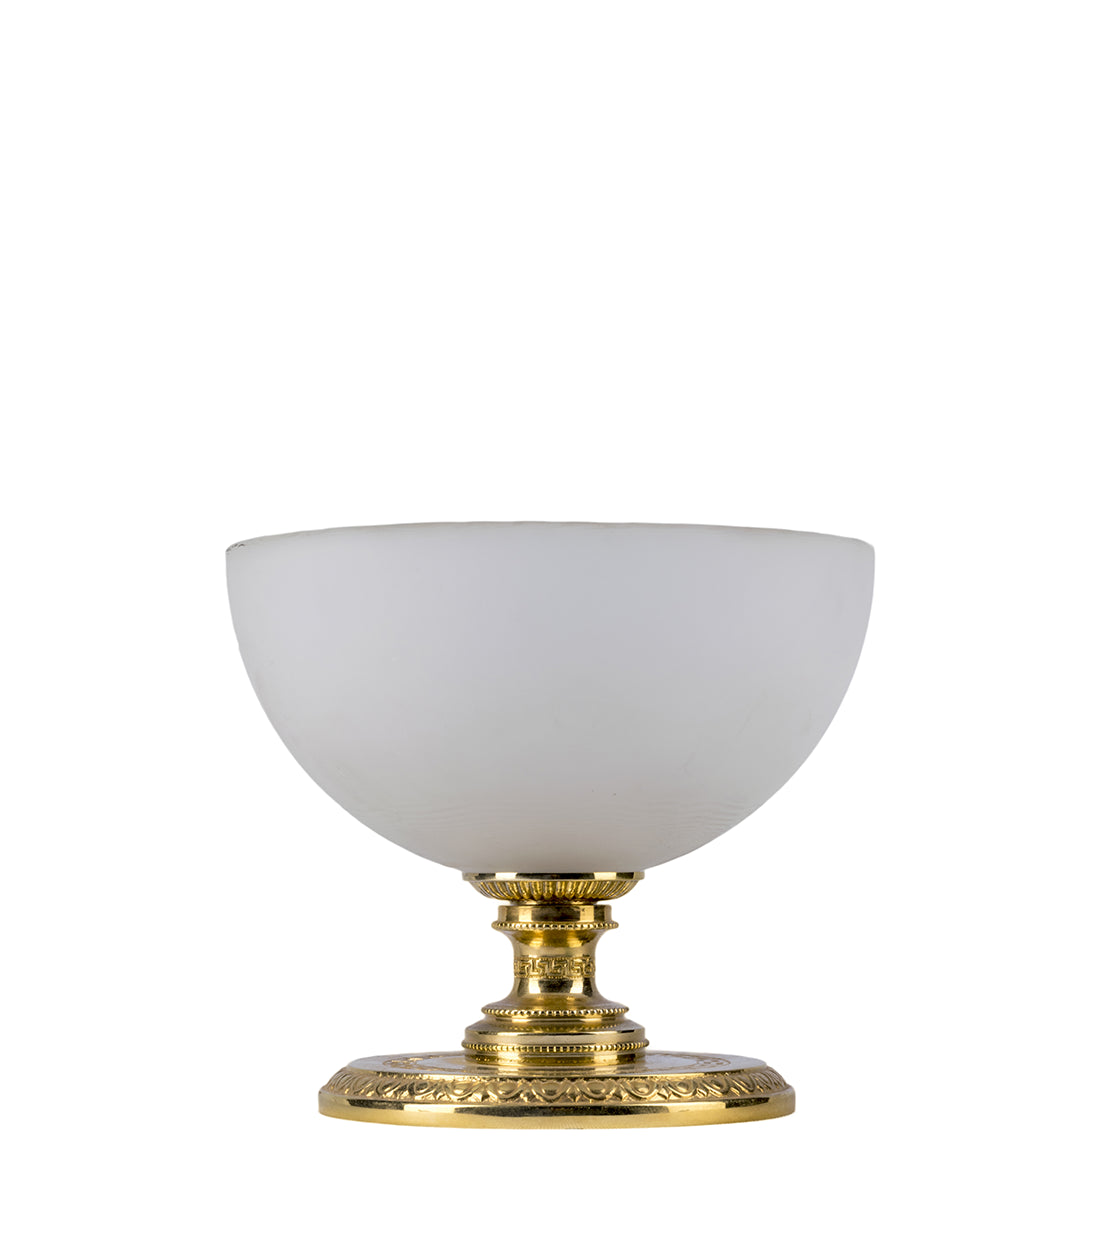 VERSACE - Gold Plated Cup Holder - The Pinnacle of Opulence in Cup Design.